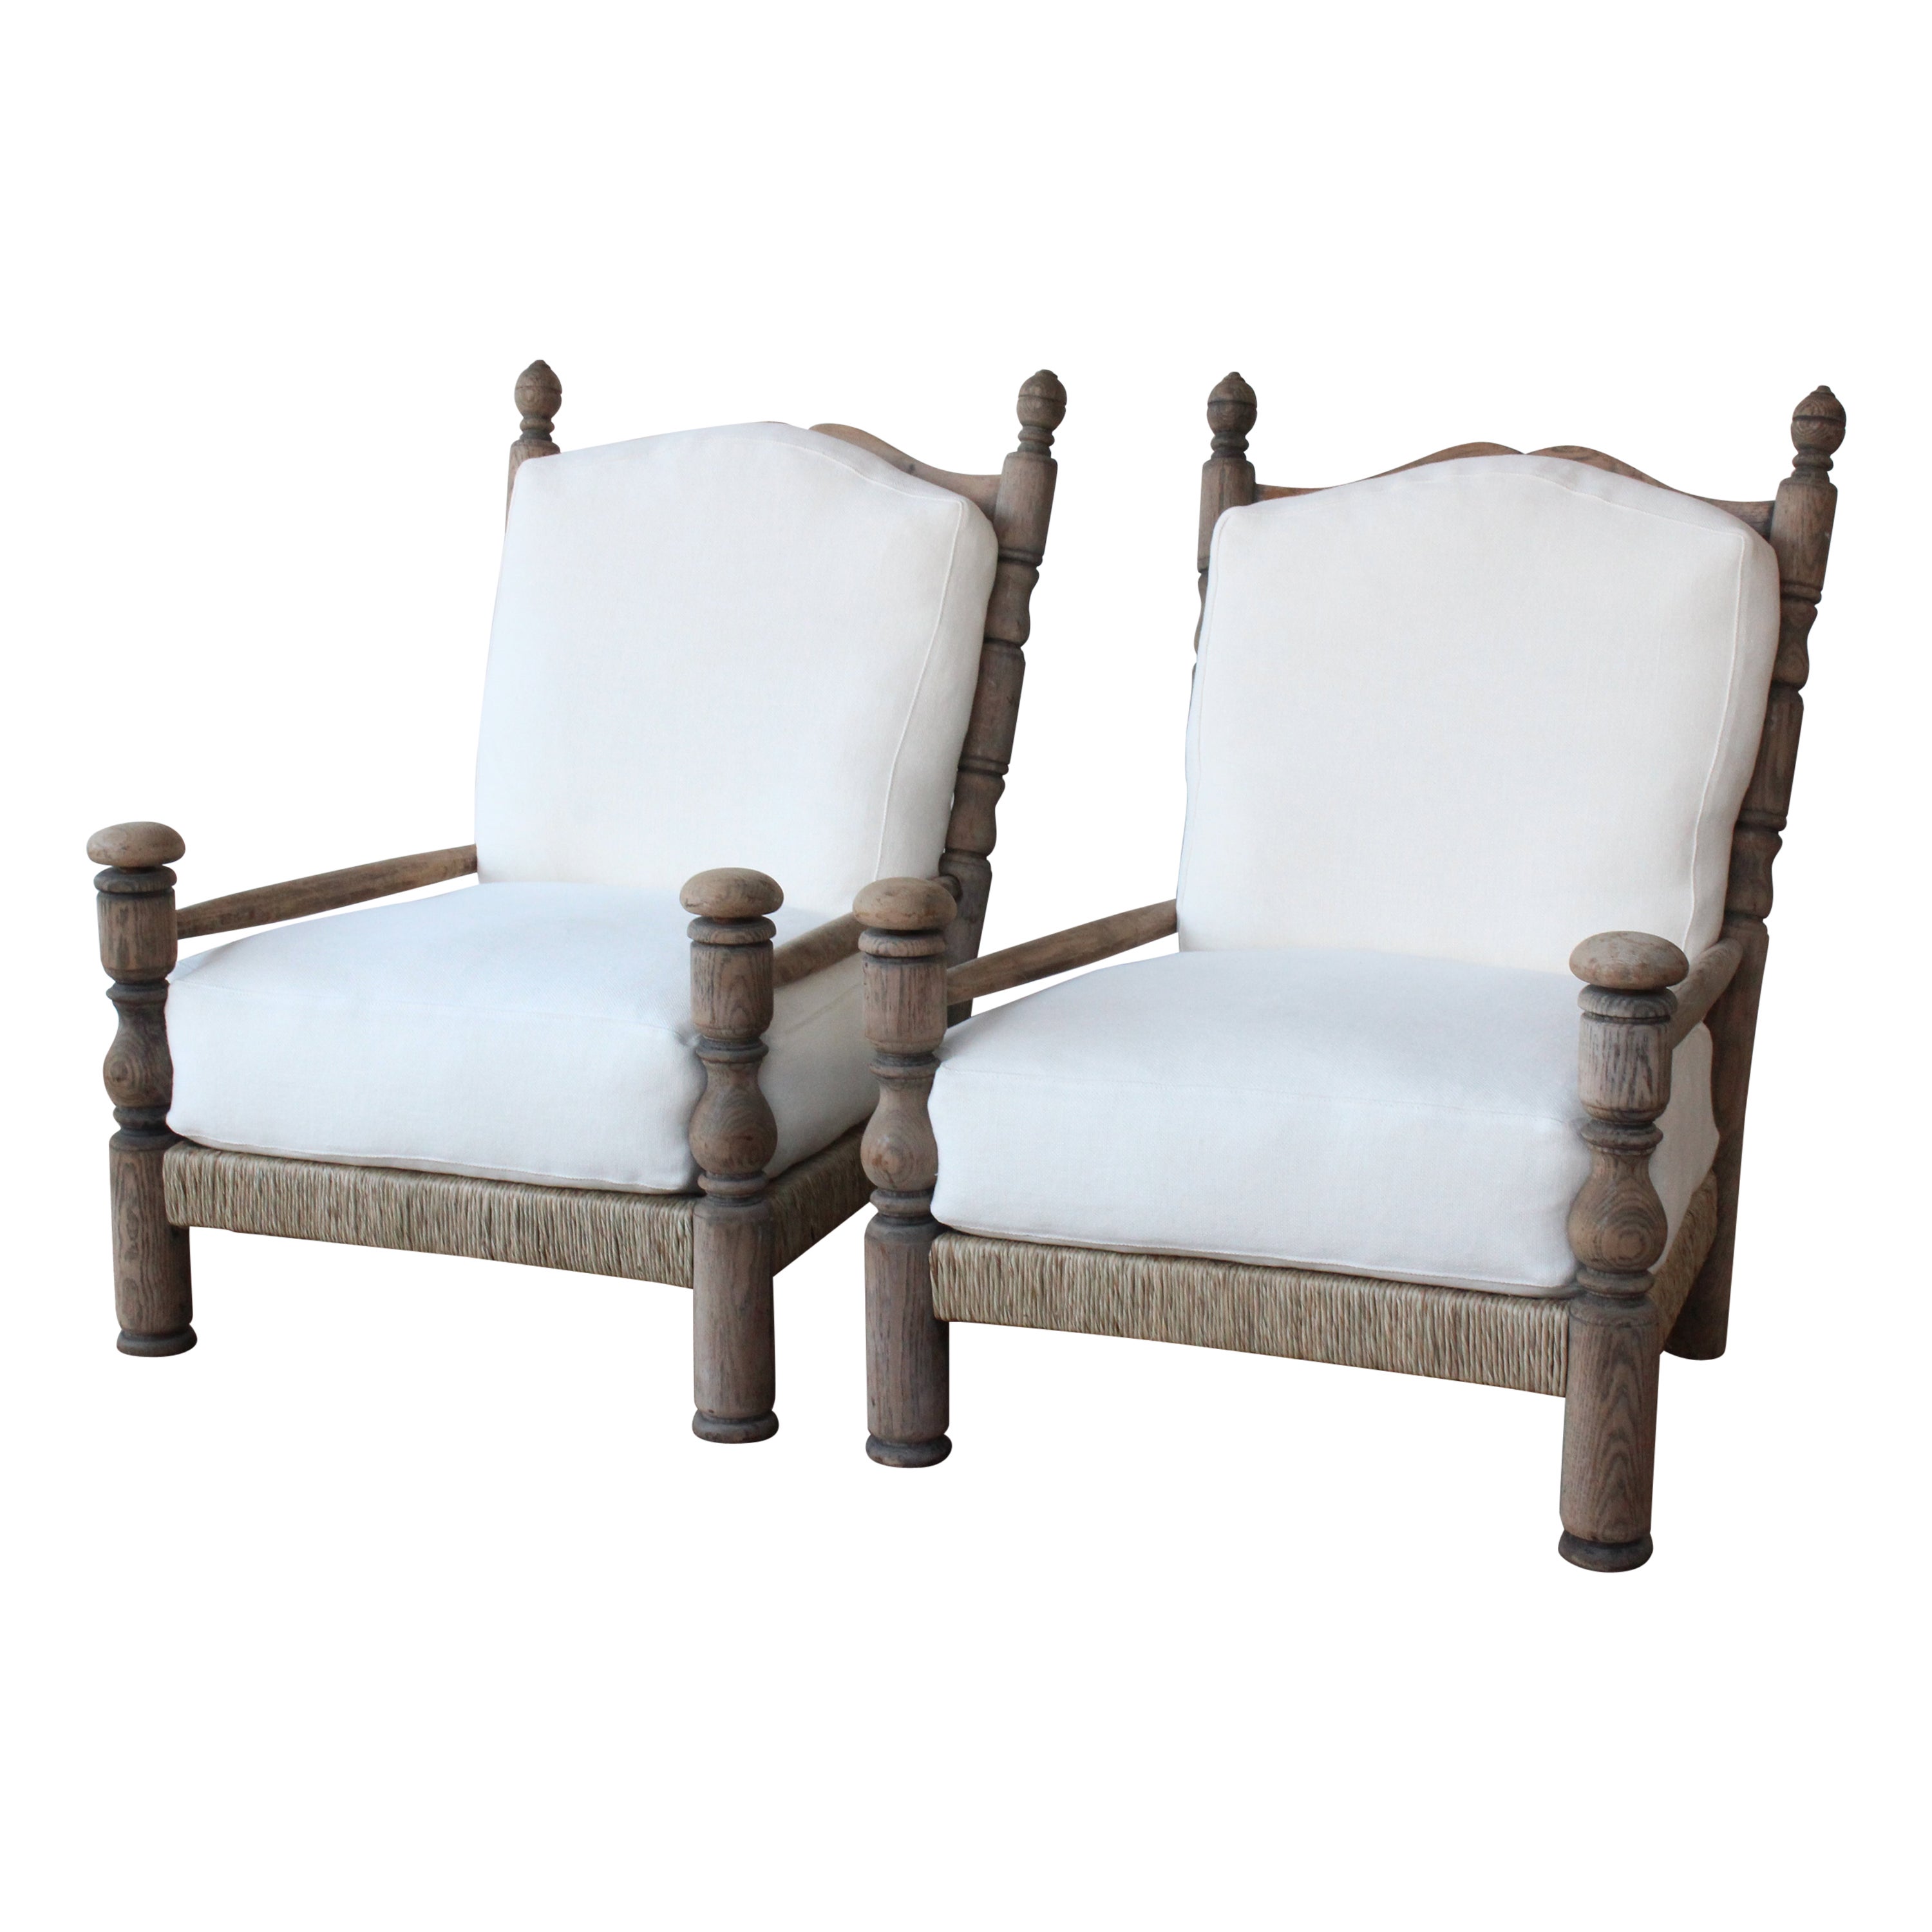 Pair of Oak and Rush Lounge Chairs, France, 1940s.